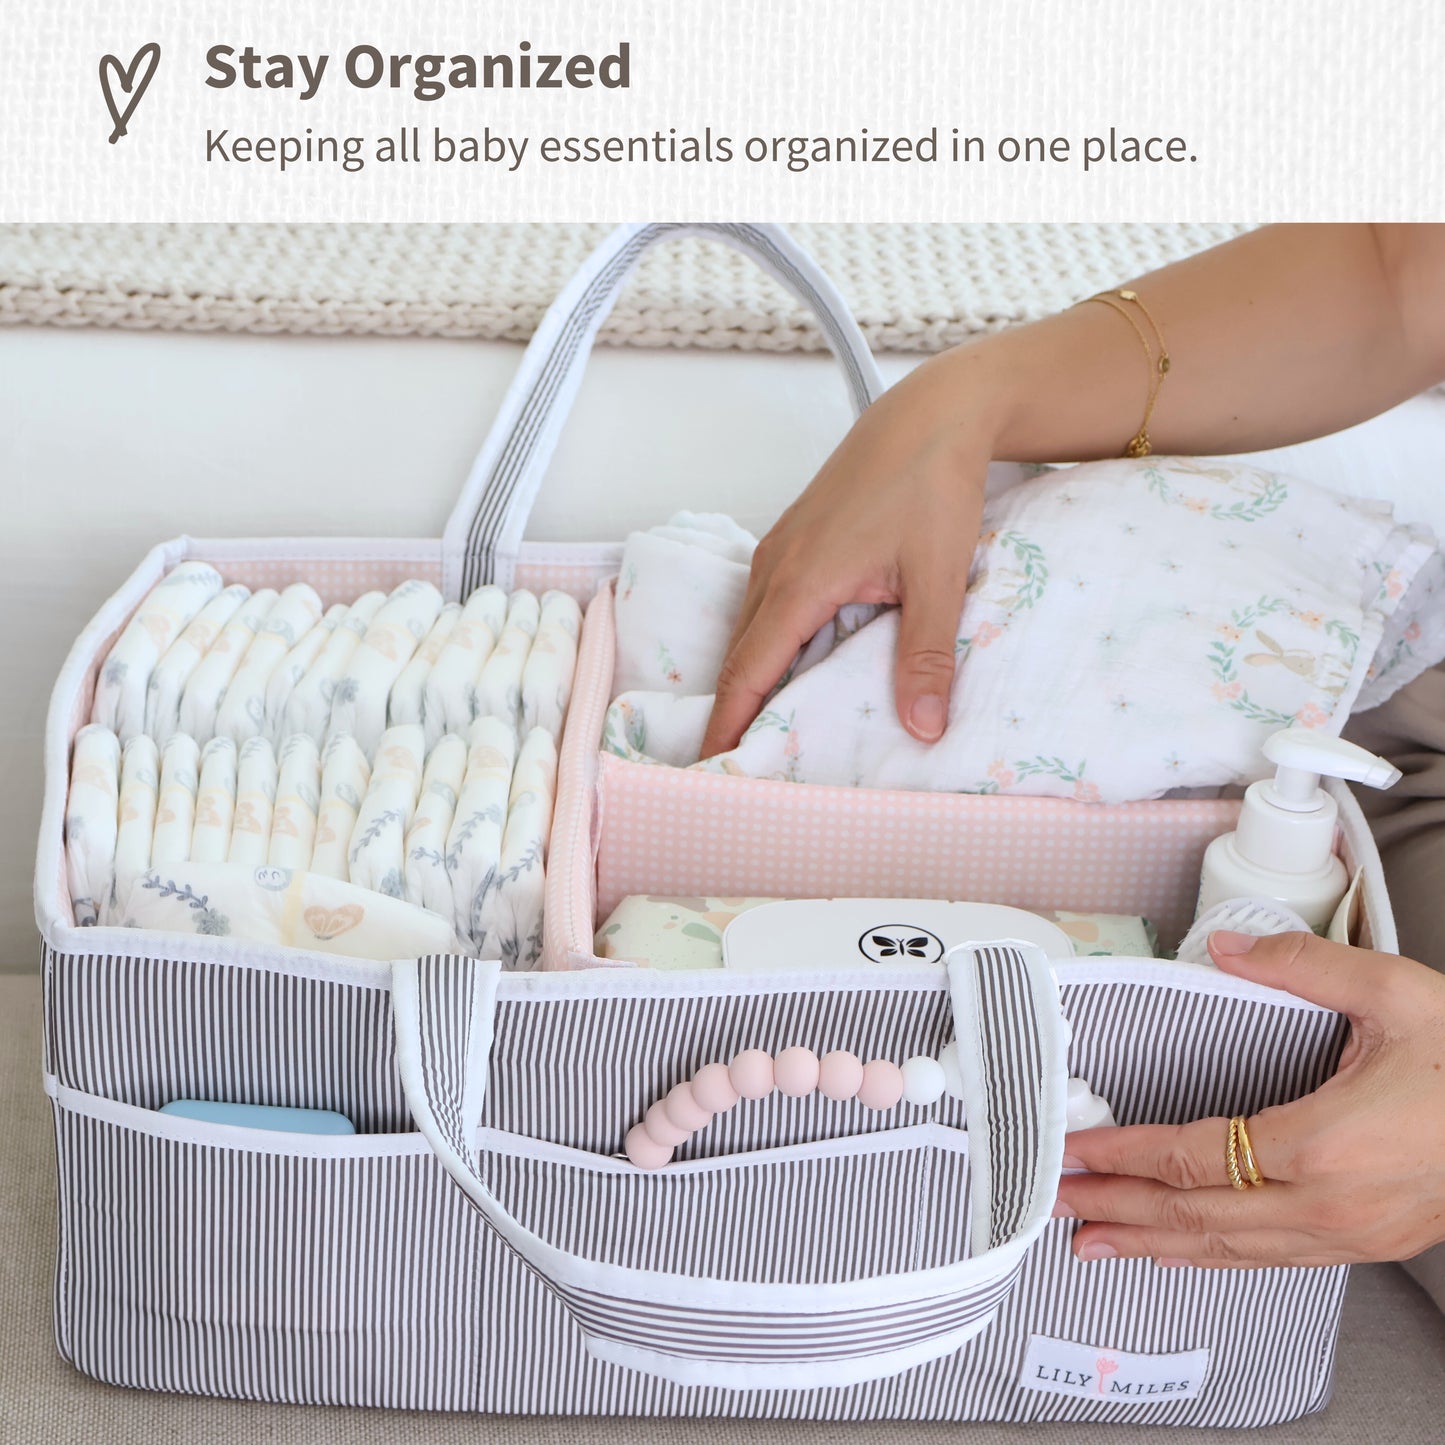 Extra Large Diaper Caddy - Gray/Blush